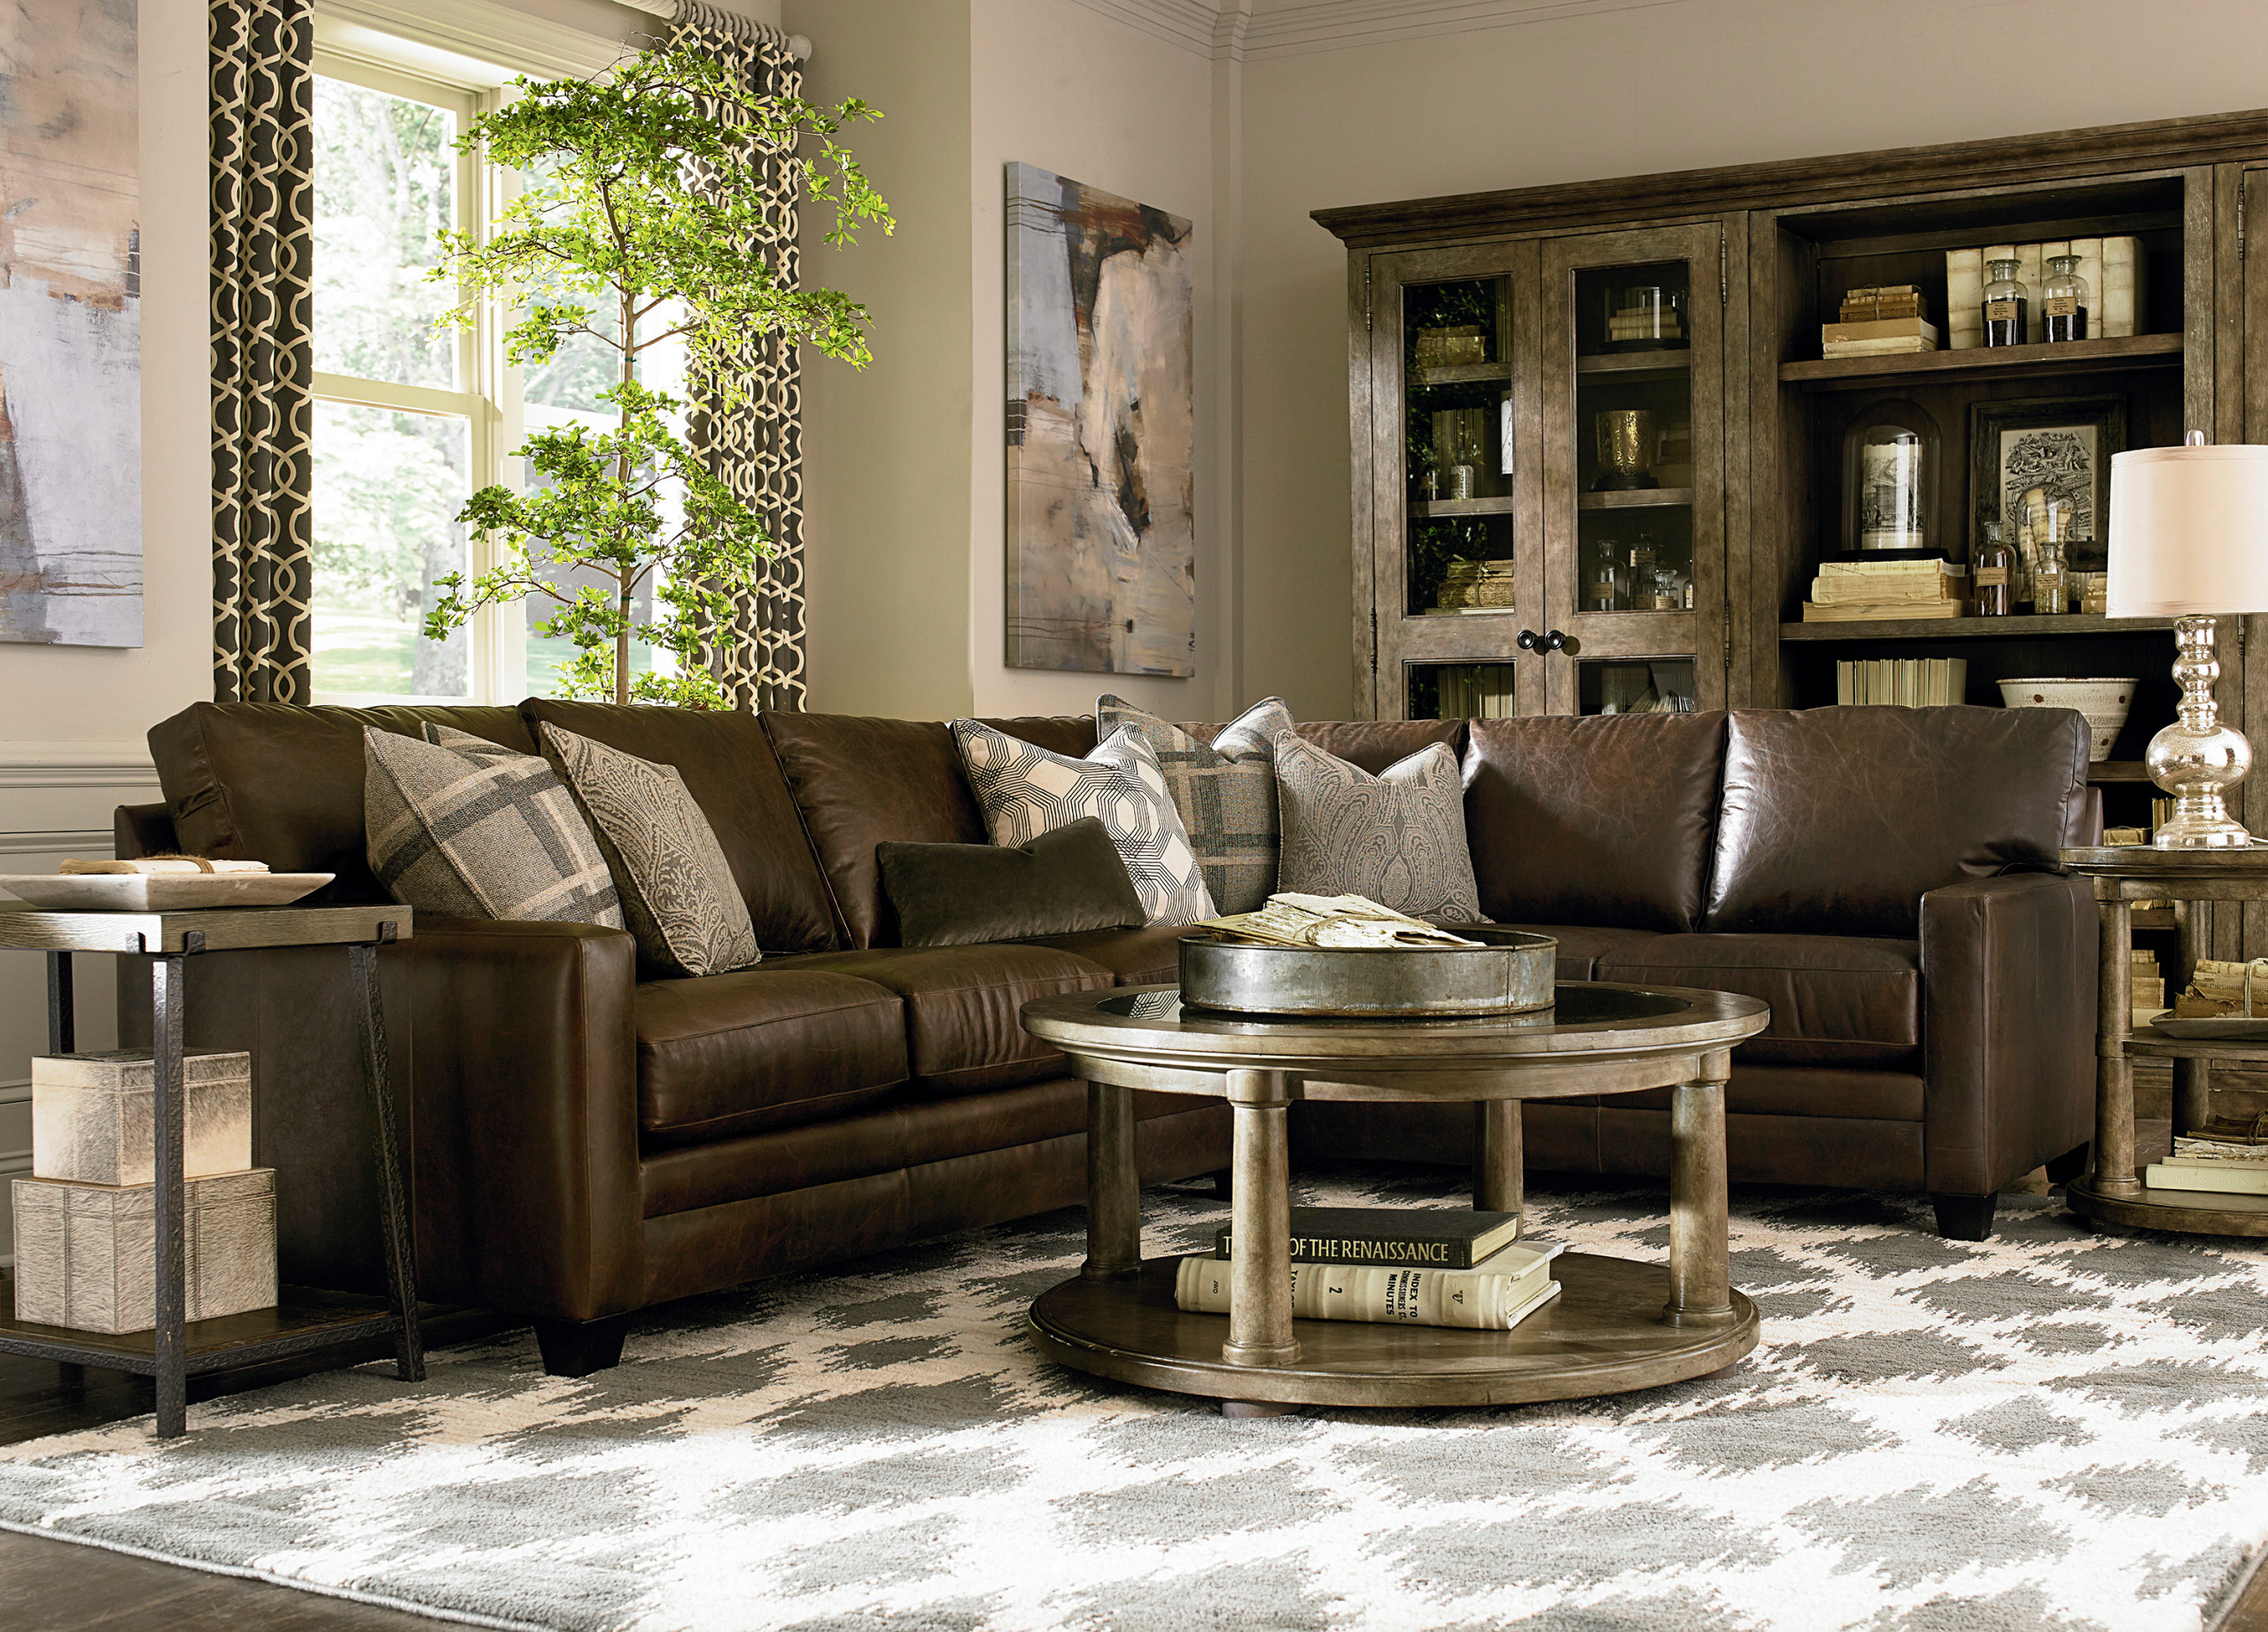 Leather Couch Living Room Design: 10 Ideas to Bring Your Space to Life ...